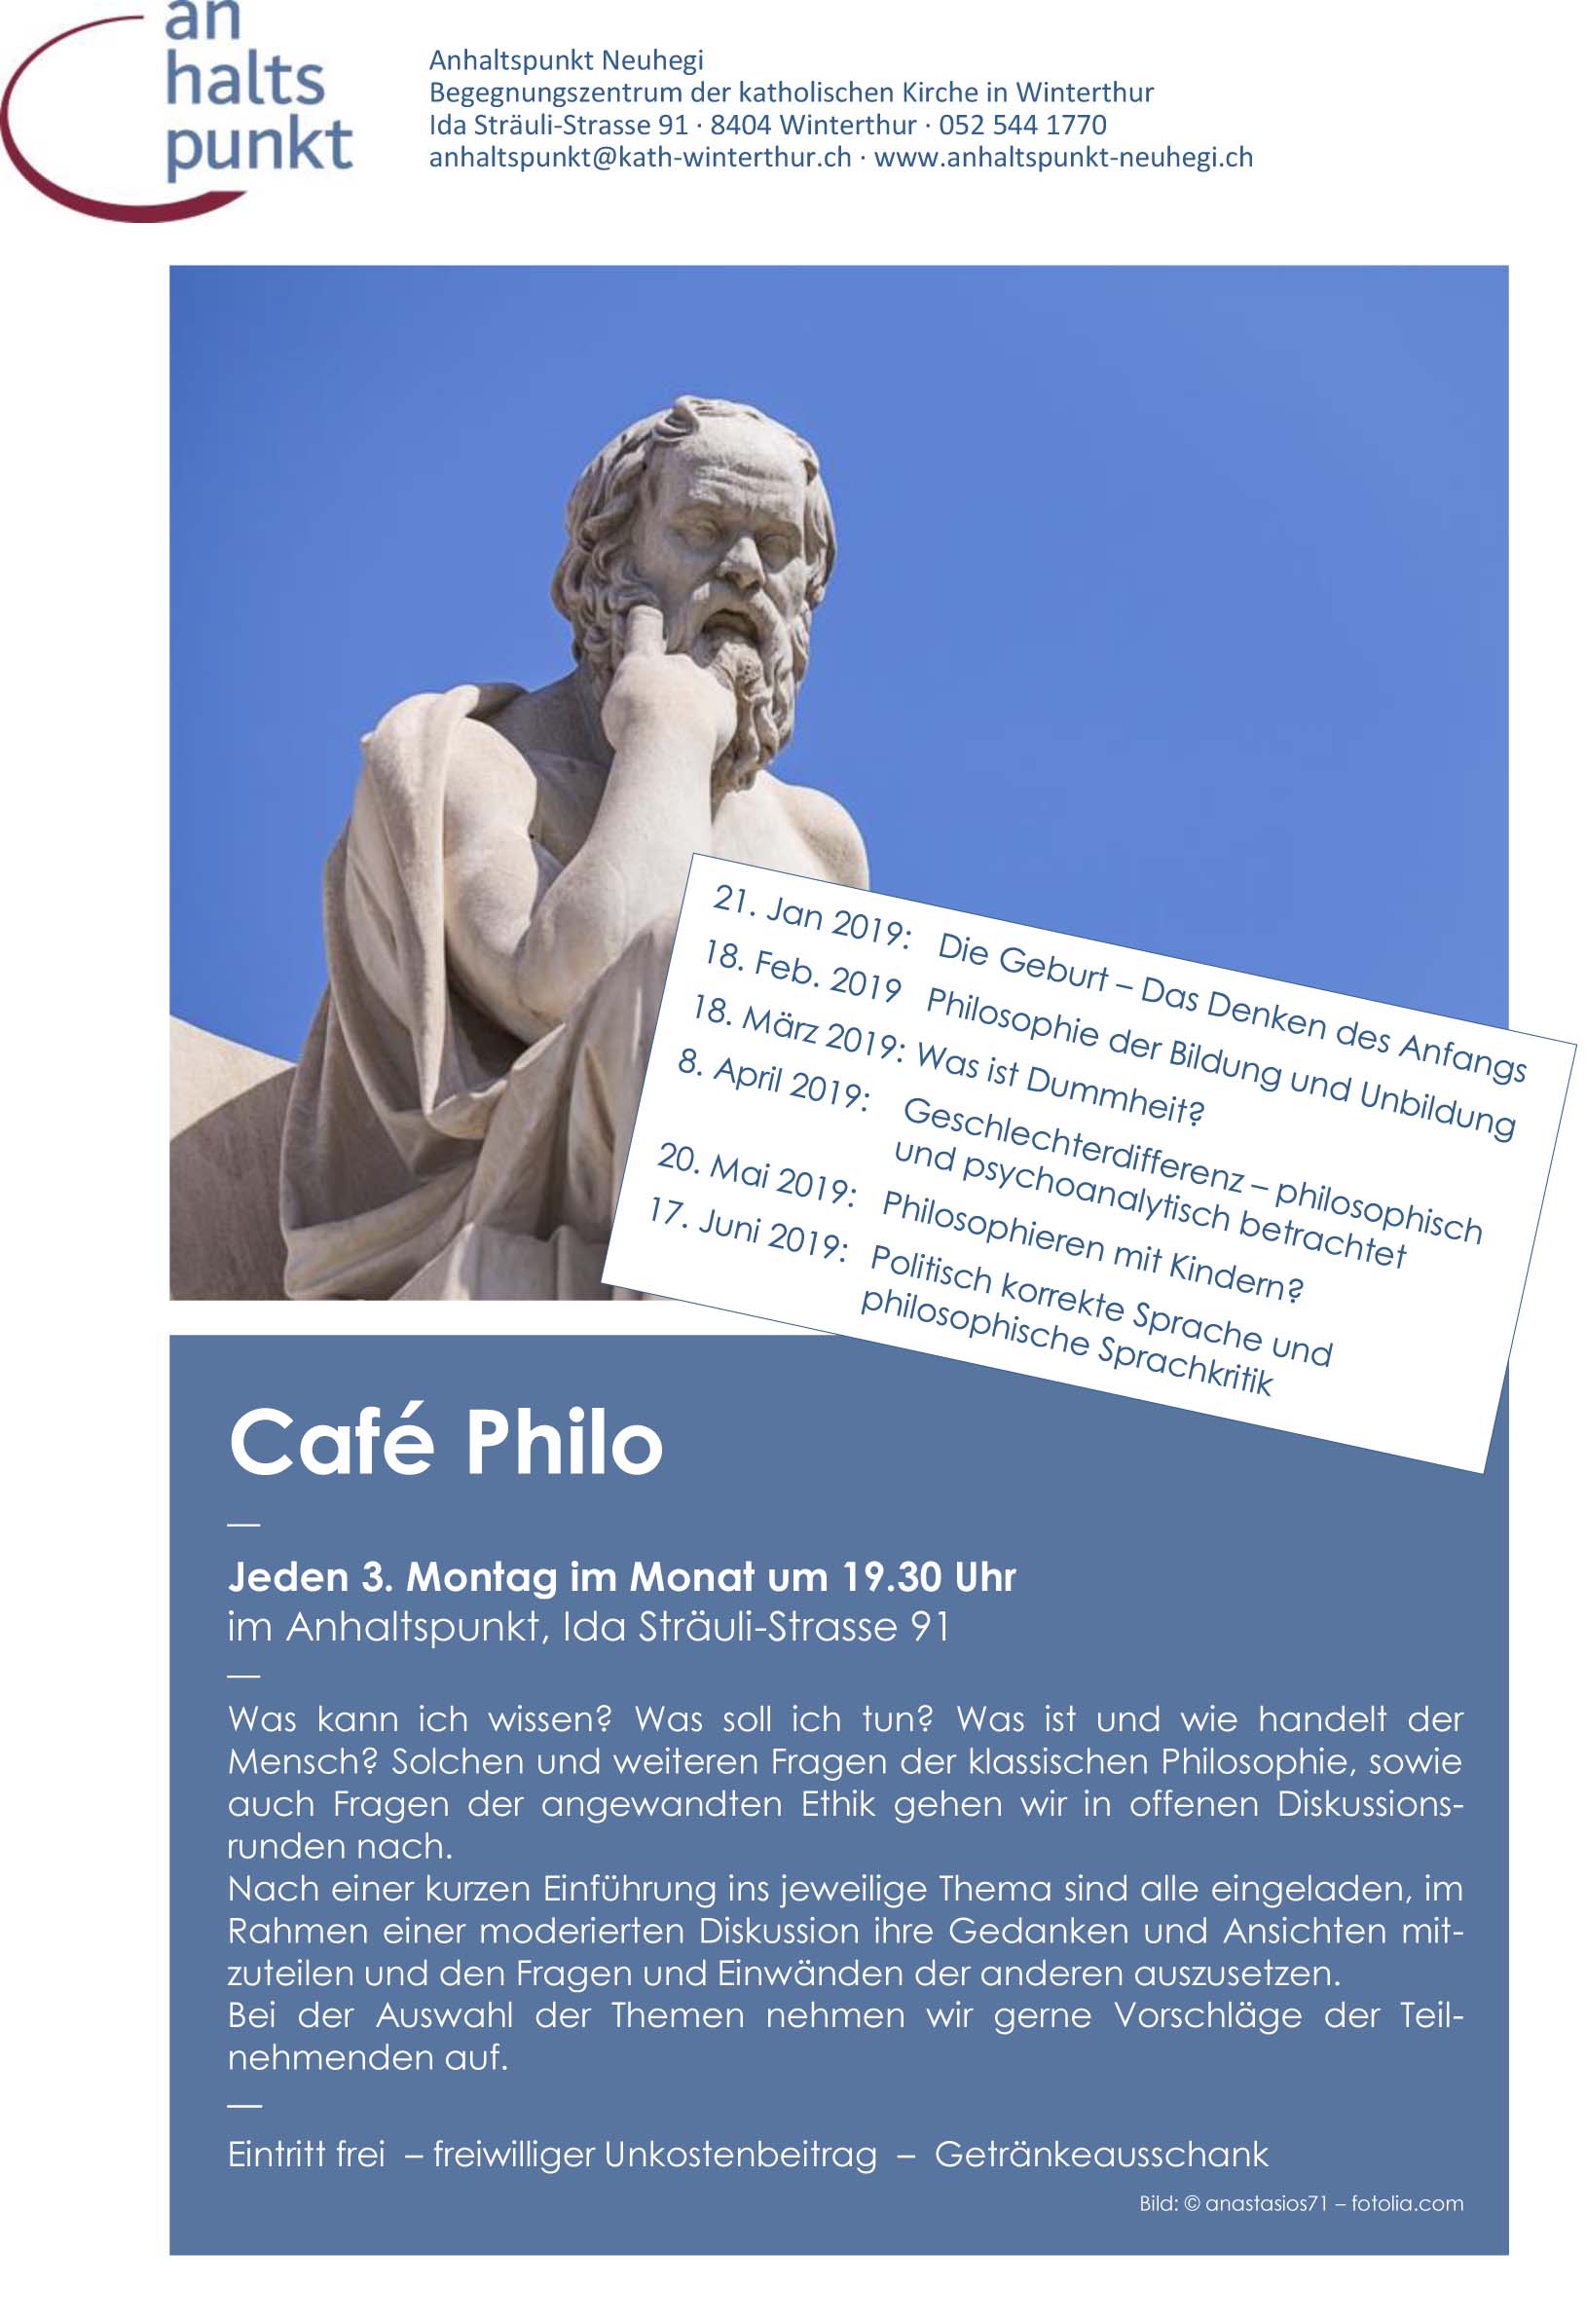 ahp Cafe Philo 2019 1